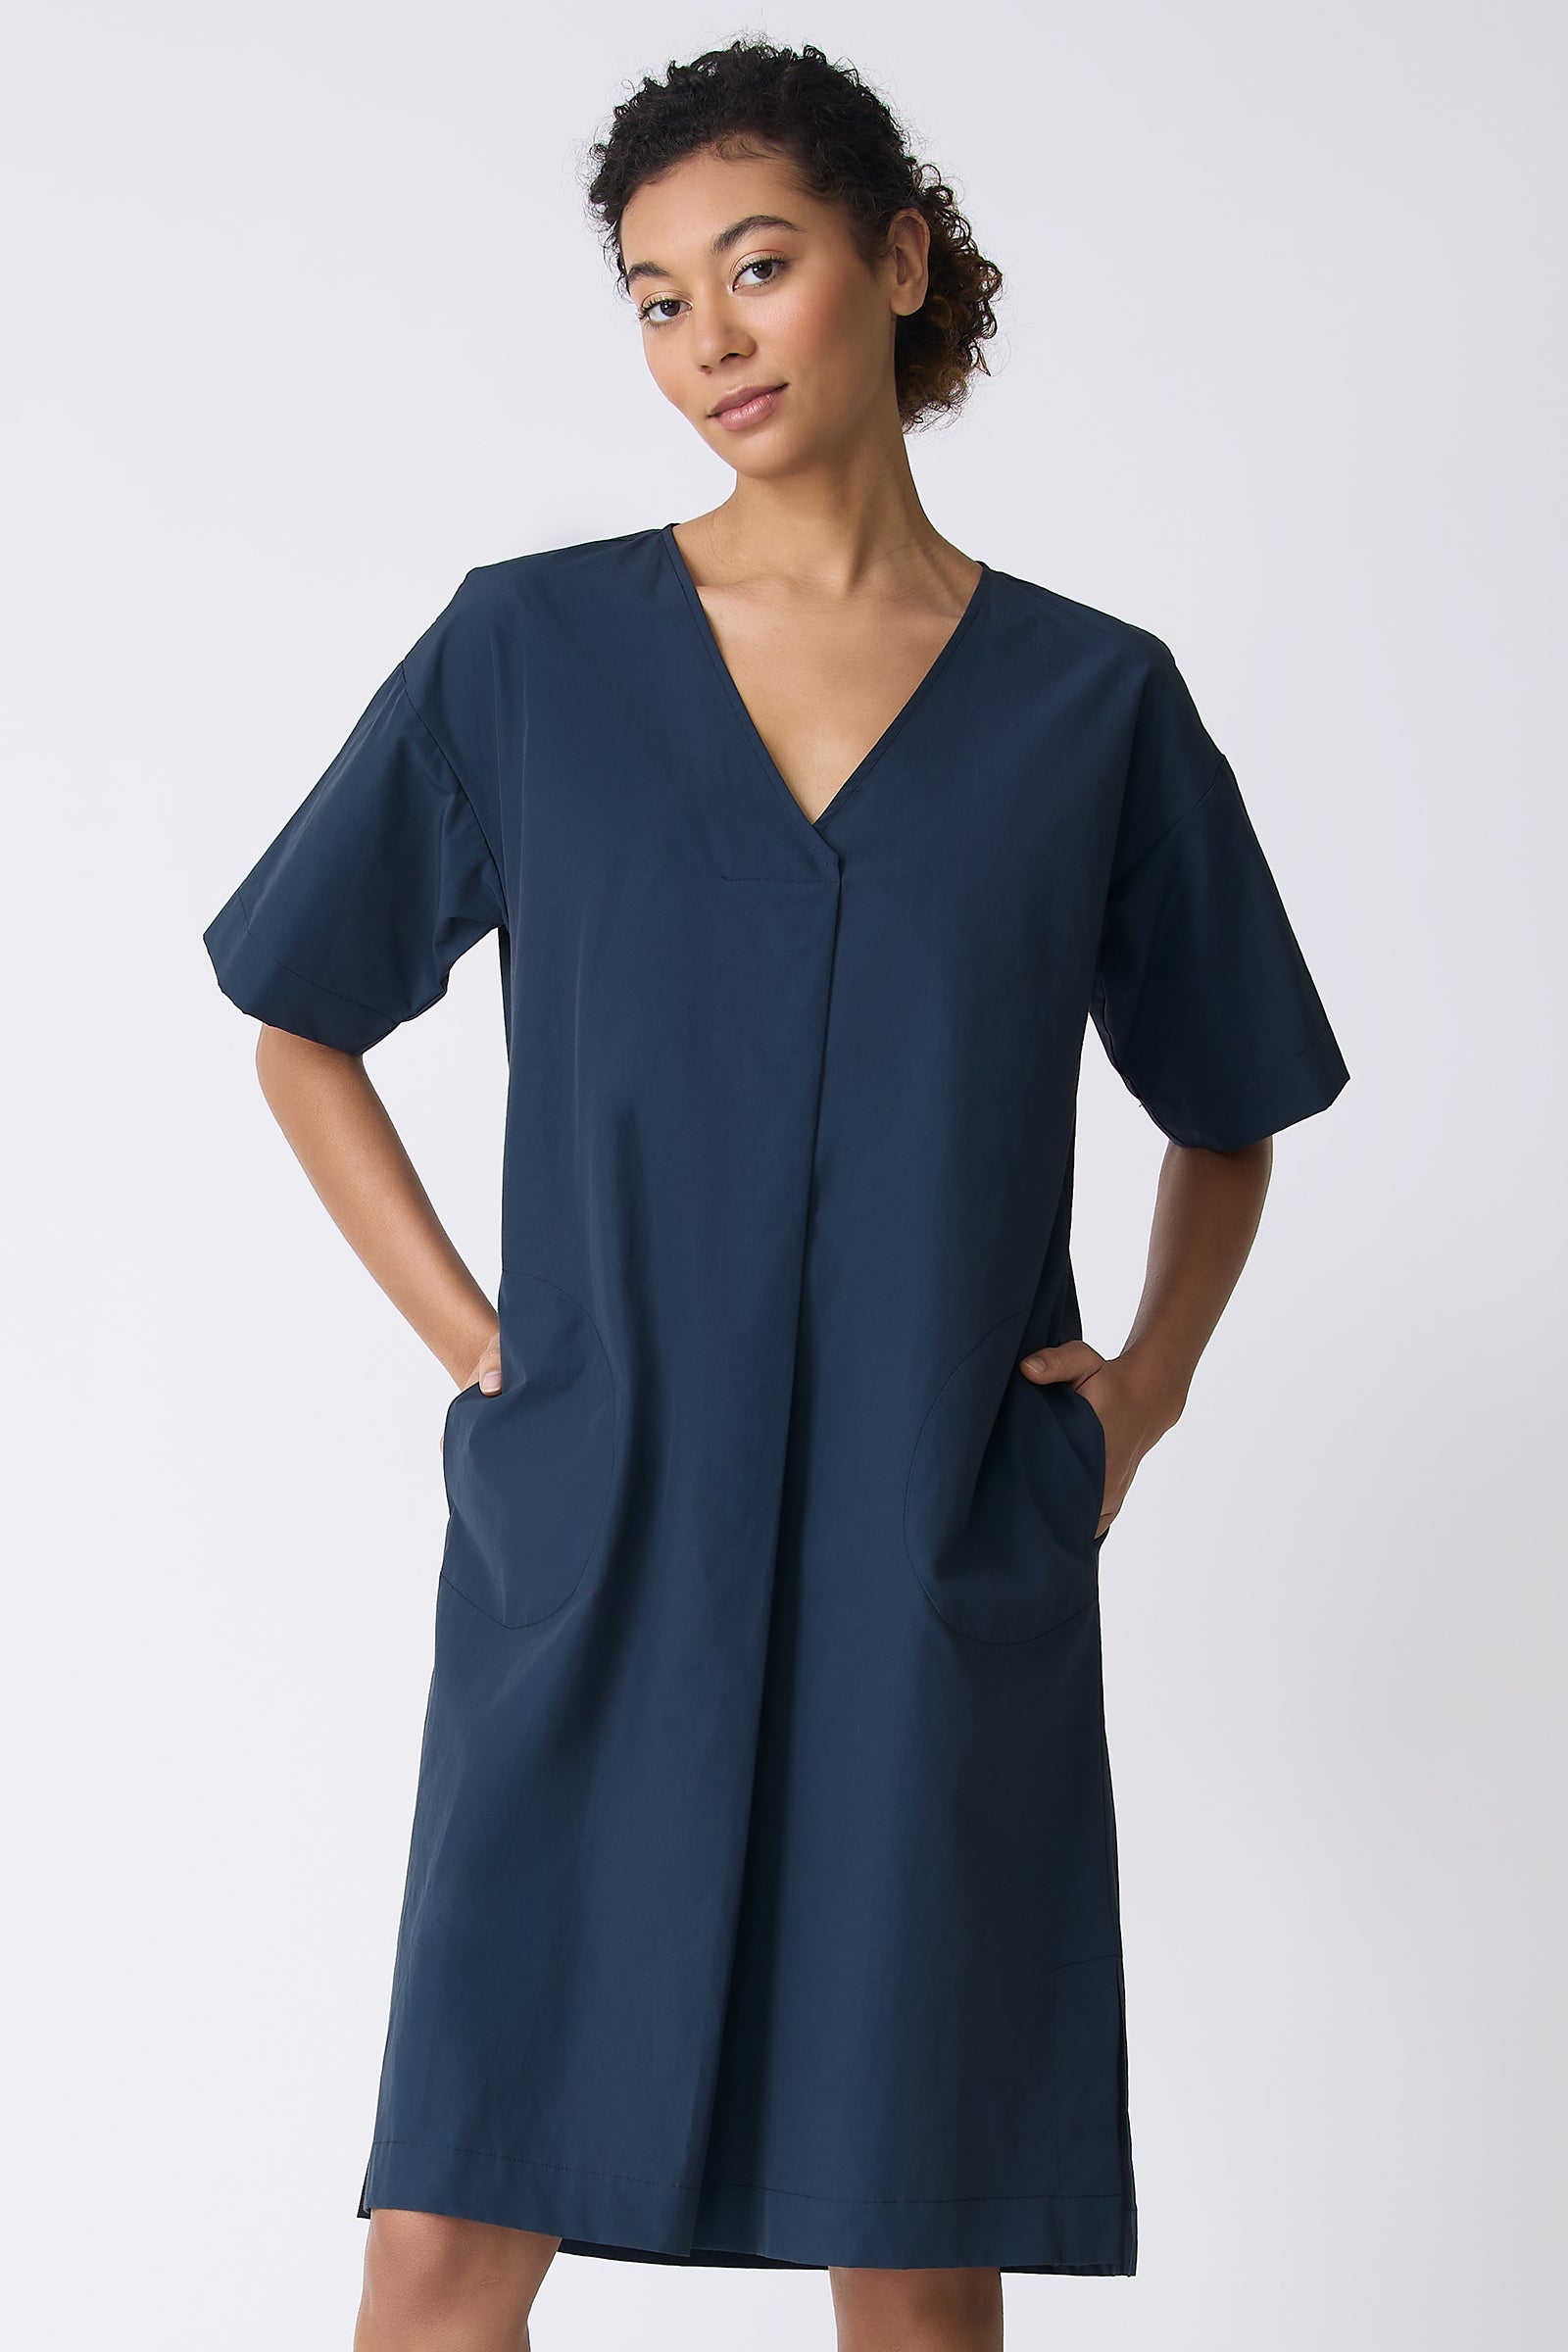 Kal Rieman Cara Fold Front Dress in Summer Navy on model with hands in pockets front view